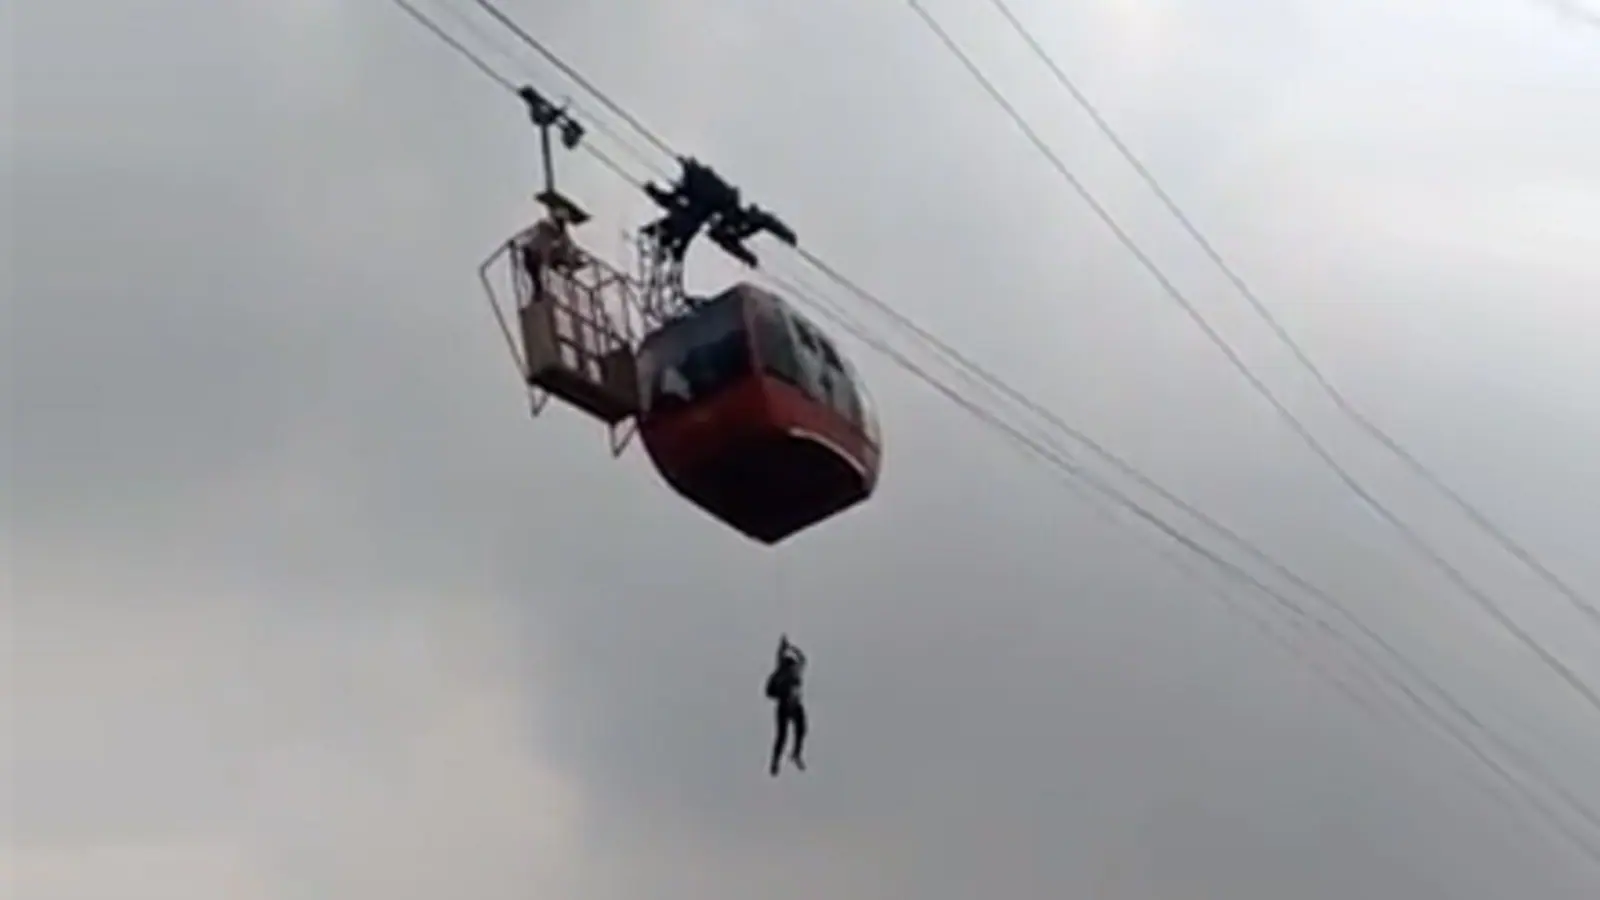 Major tragedy: Heartbroken rescue of people trapped in cable car stuck in Himachal